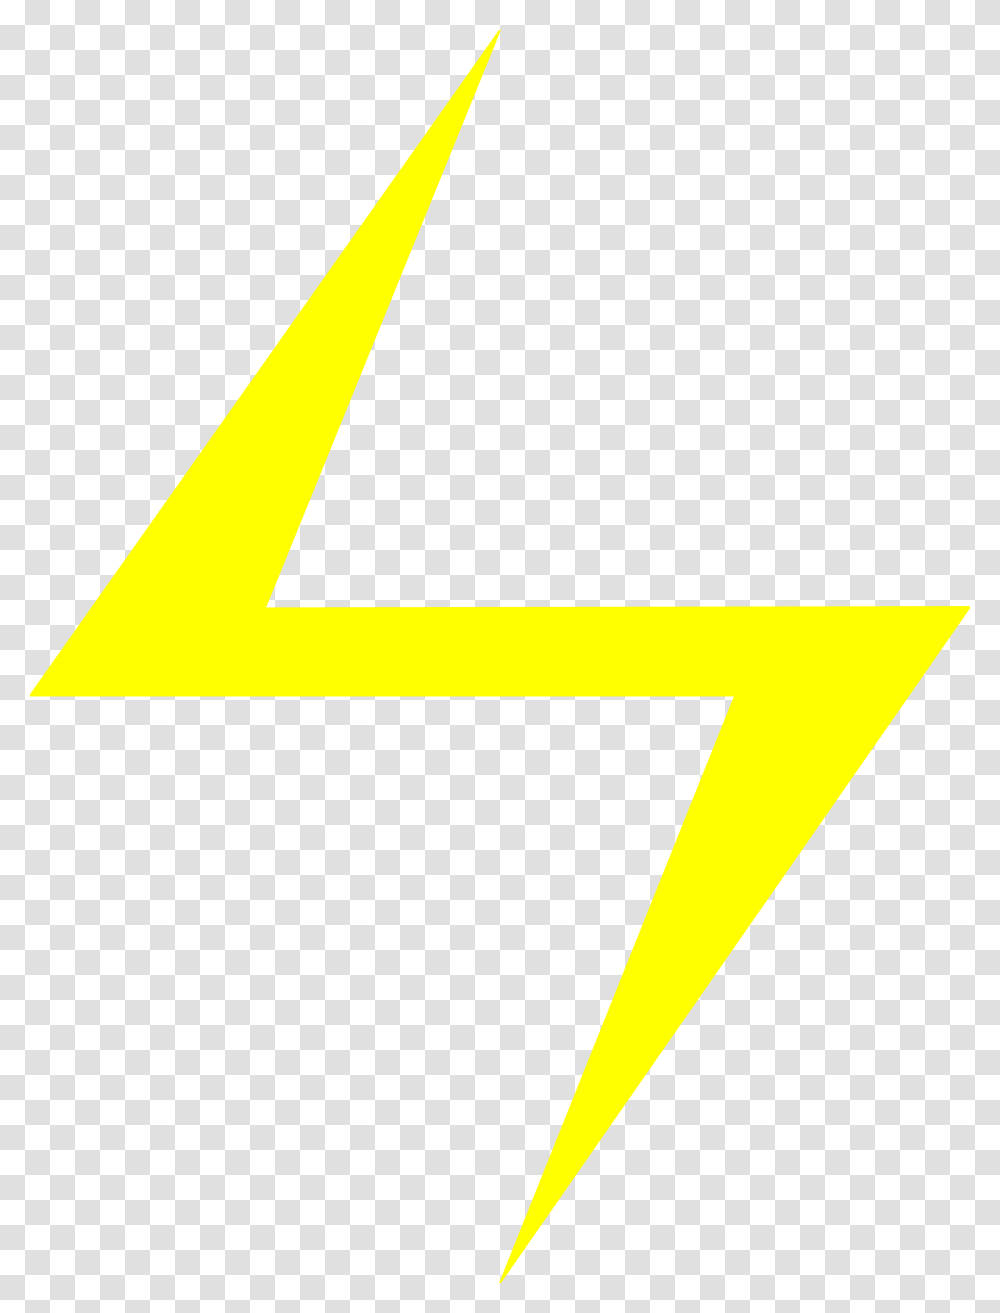 White Lightning Bolt Clipart 44047 Free Icons And Ms Marvel Symbol, Text, Number, Metropolis, City Transparent Png